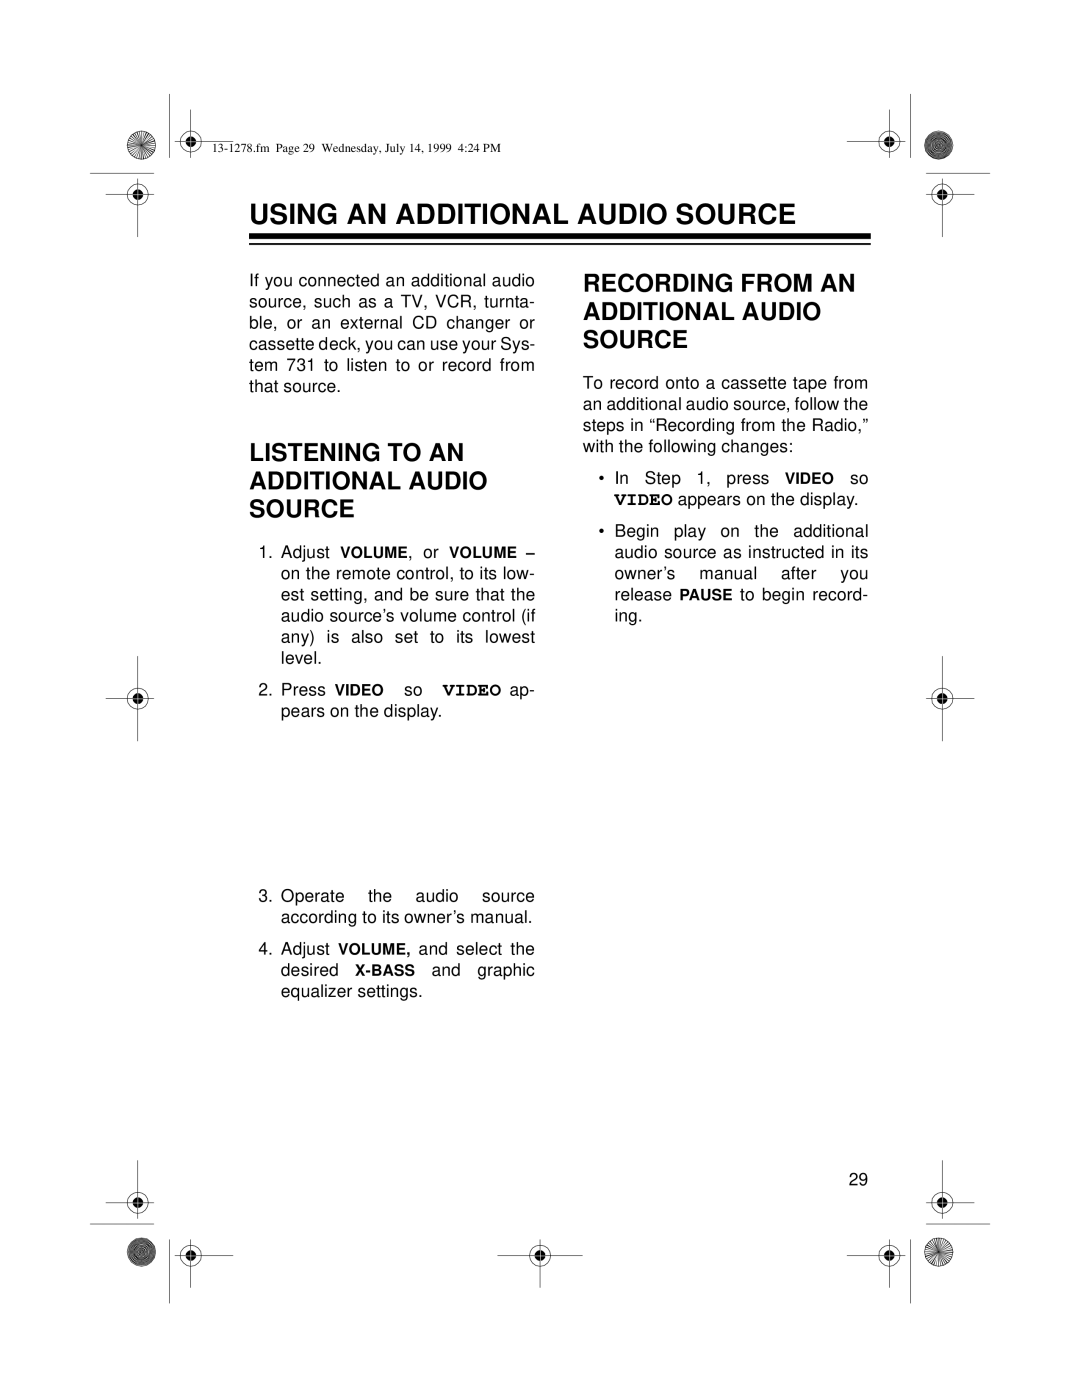 Optimus 731 owner manual Using An Additional Audio Source, Listening To An Additional Audio Source 